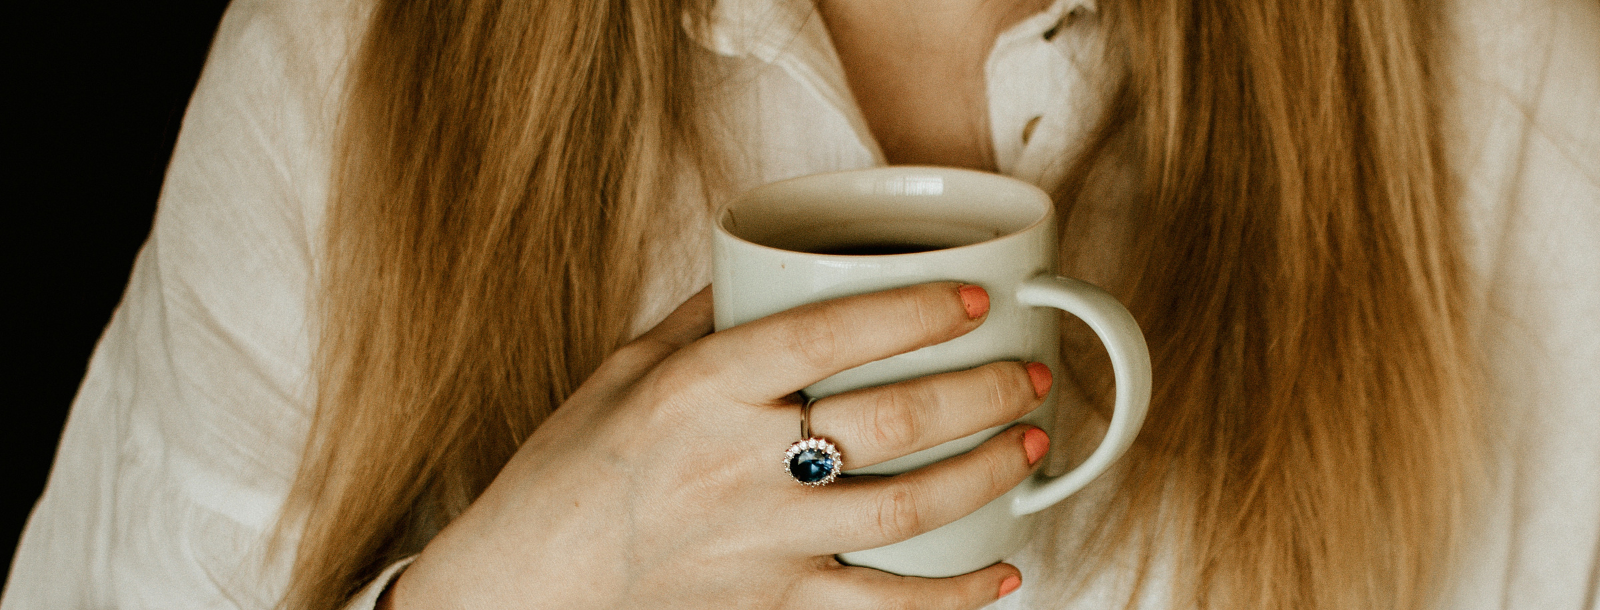 woman drinking coffee she knows herself and her values